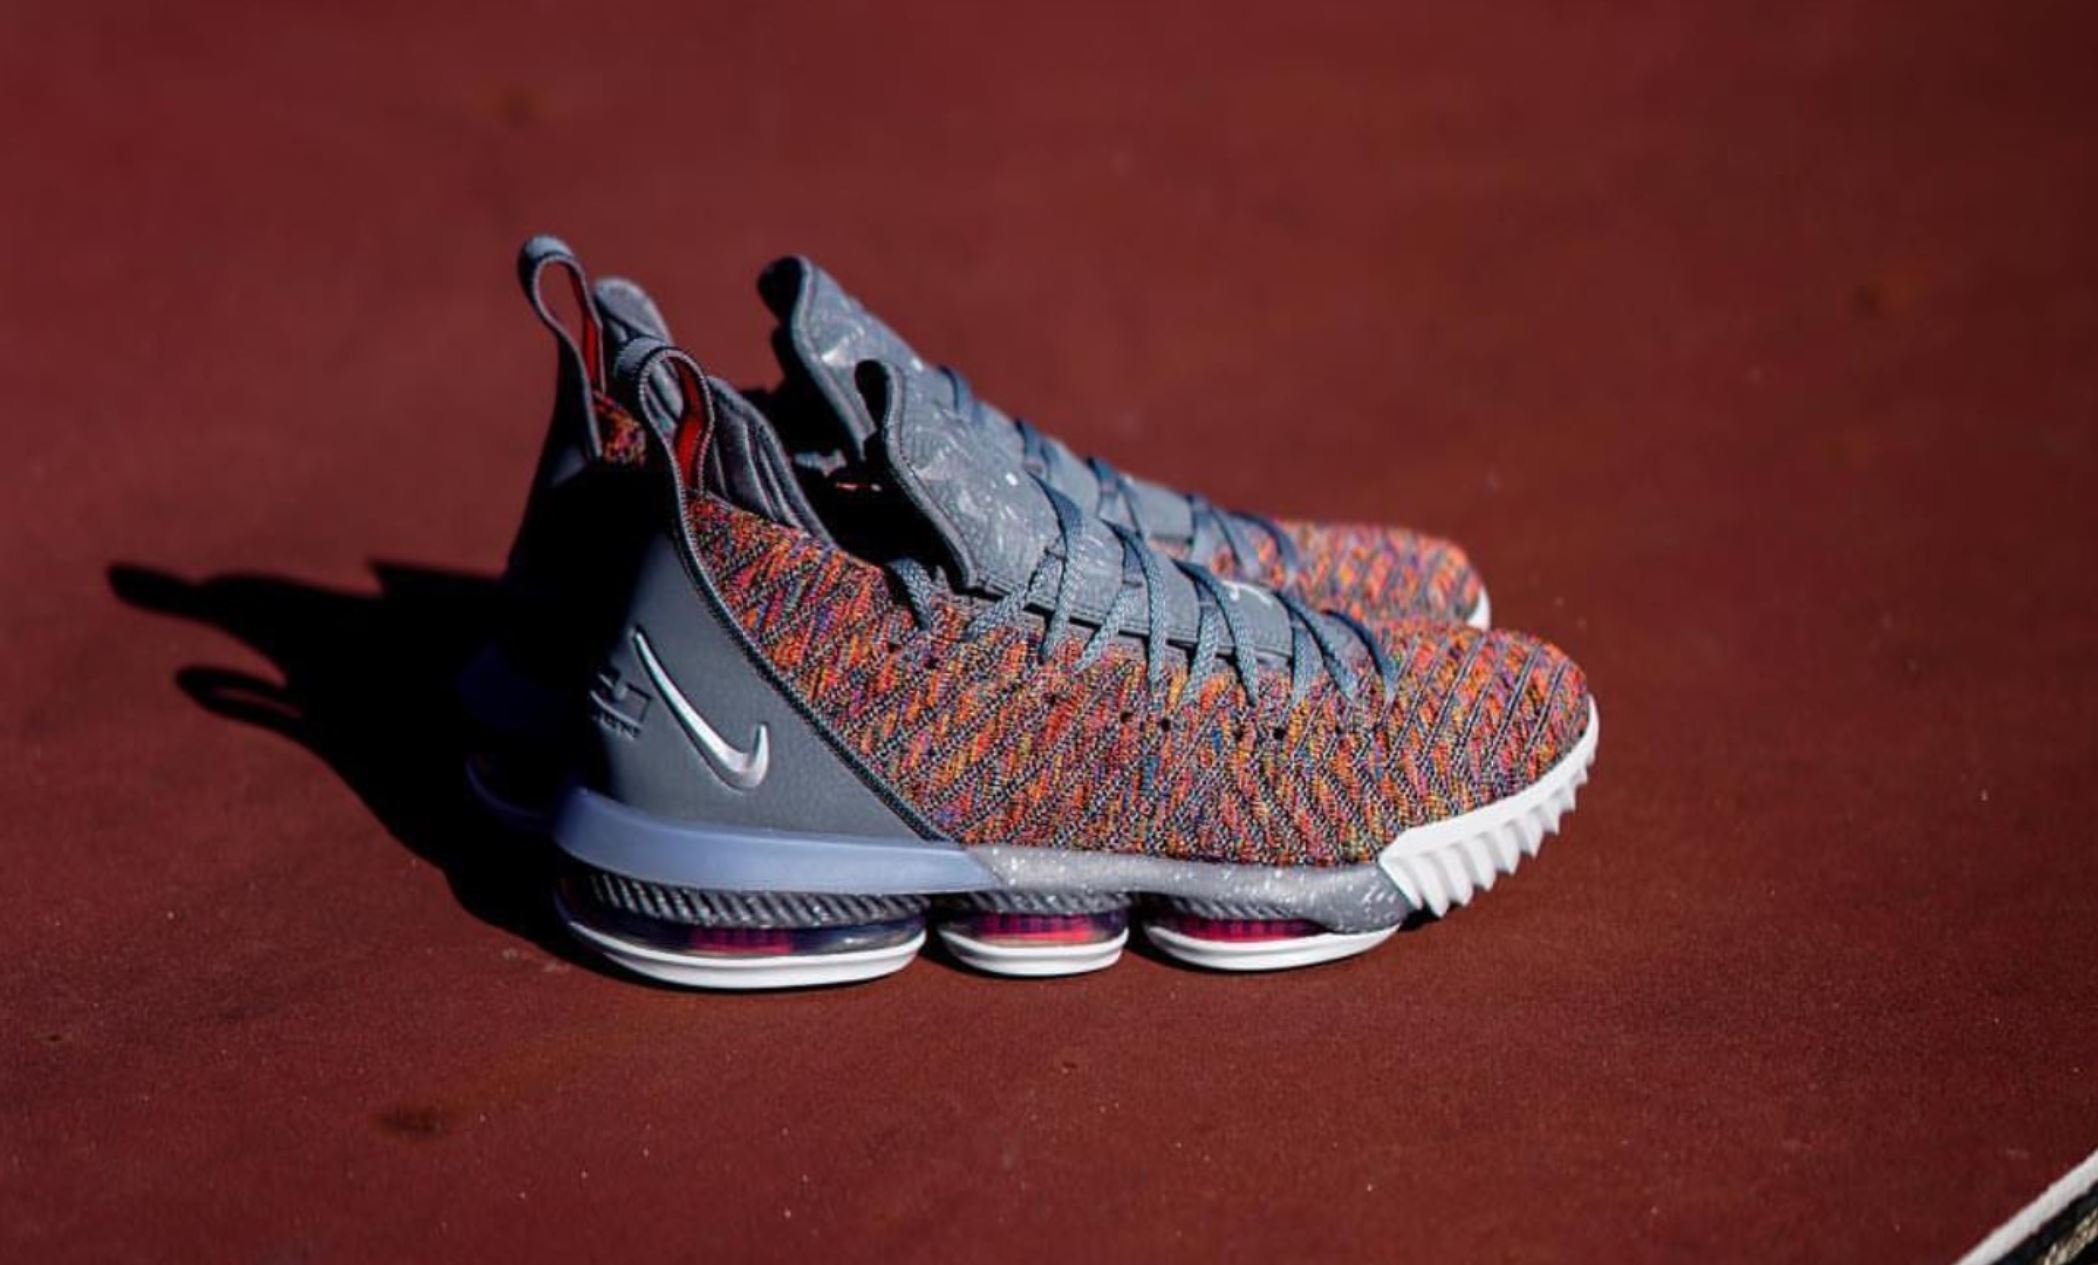 The LeBron 16 '20/20' Release Date is 